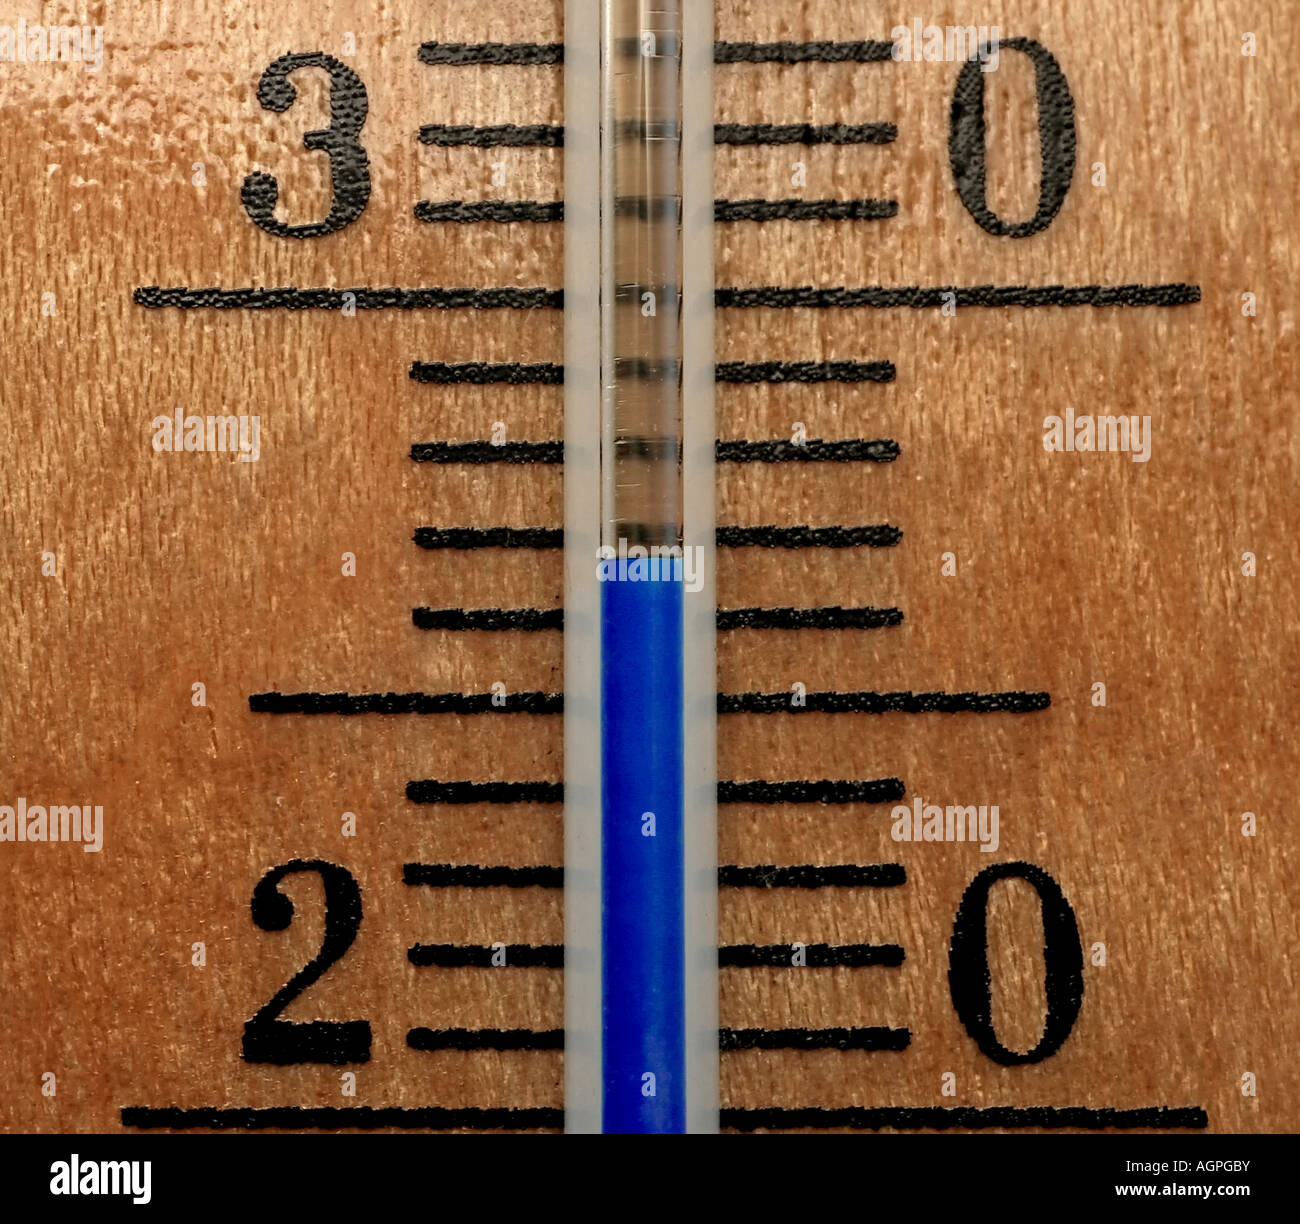 Wine thermometer stock photo. Image of white, close, thermometer - 2075802